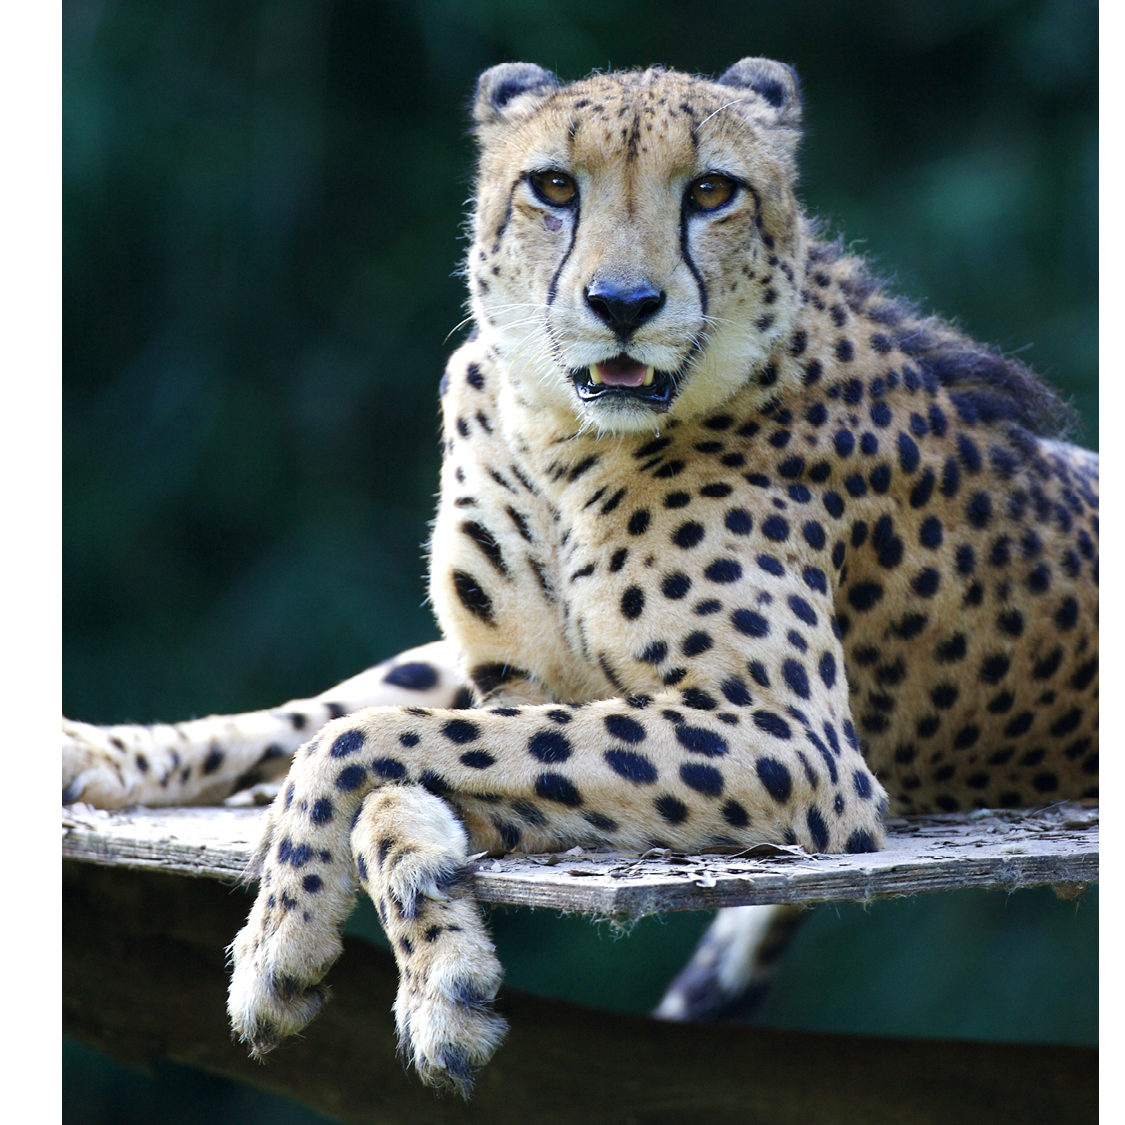 Cheetahs have semi-retractable claws that give them great grip on the ground - photo 10